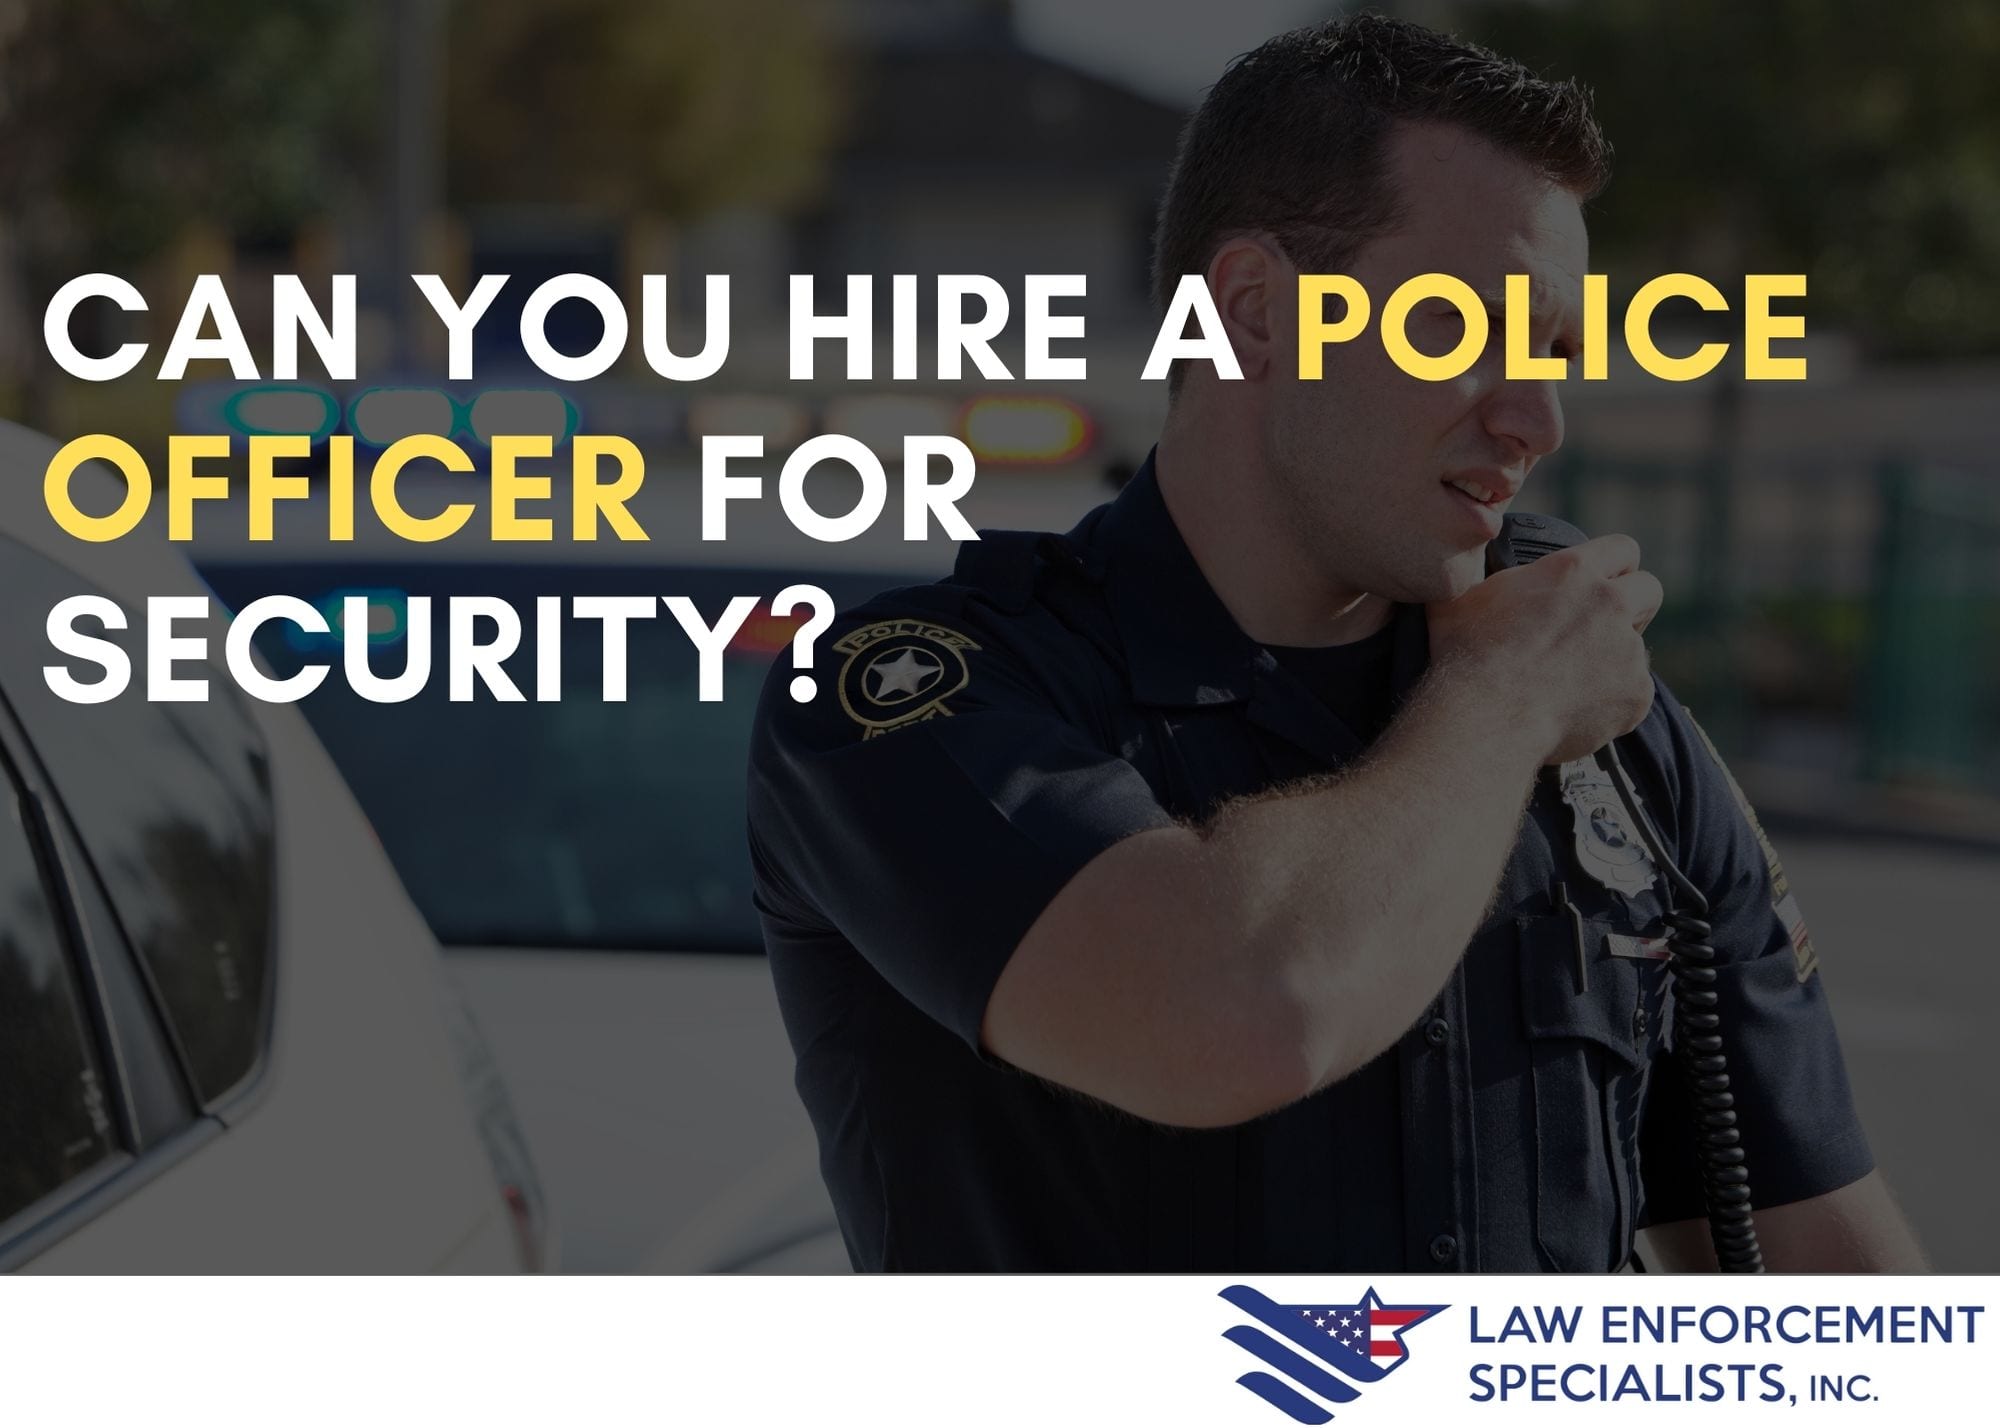 Can you hire a police officer for security?